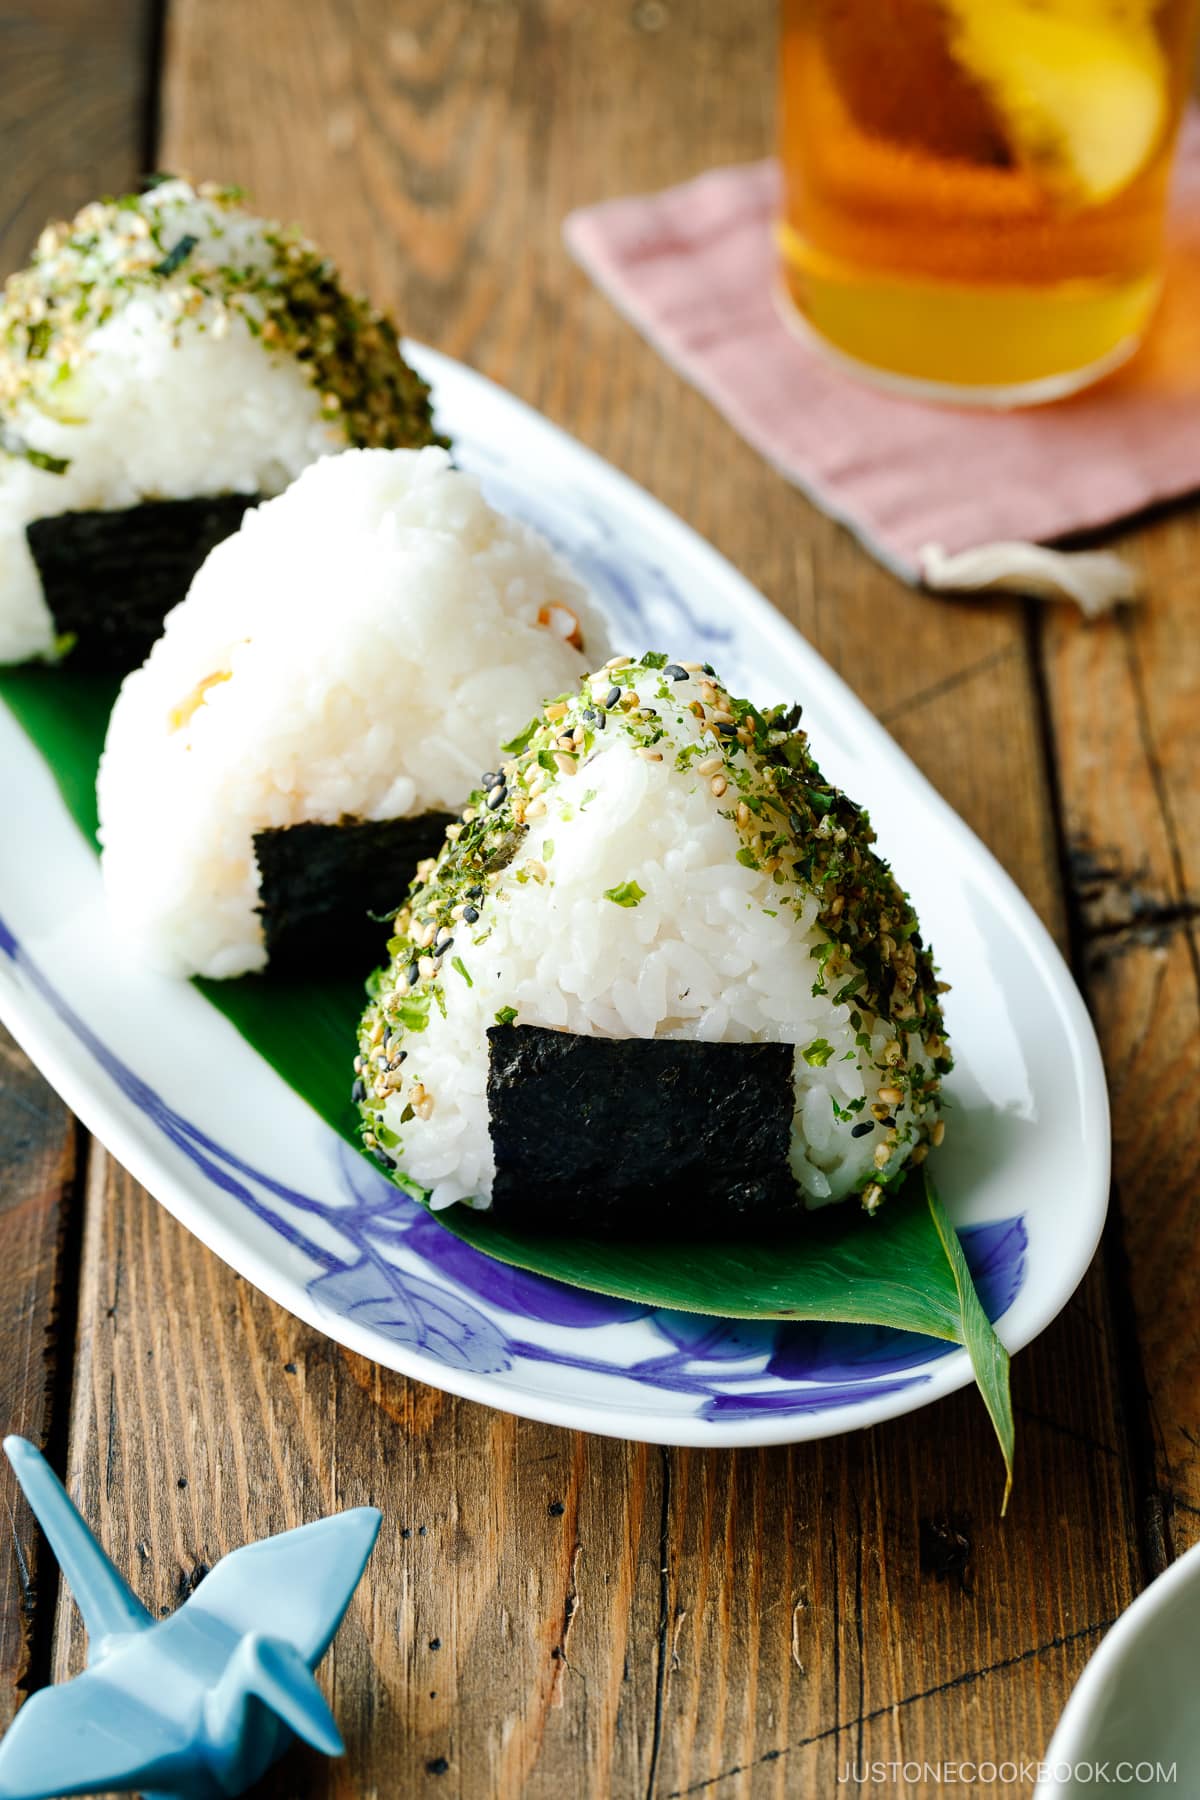 An oval plate containing 3 pieces of Onigiri (Japanese Rice Balls) placed on a bamboo leaf.